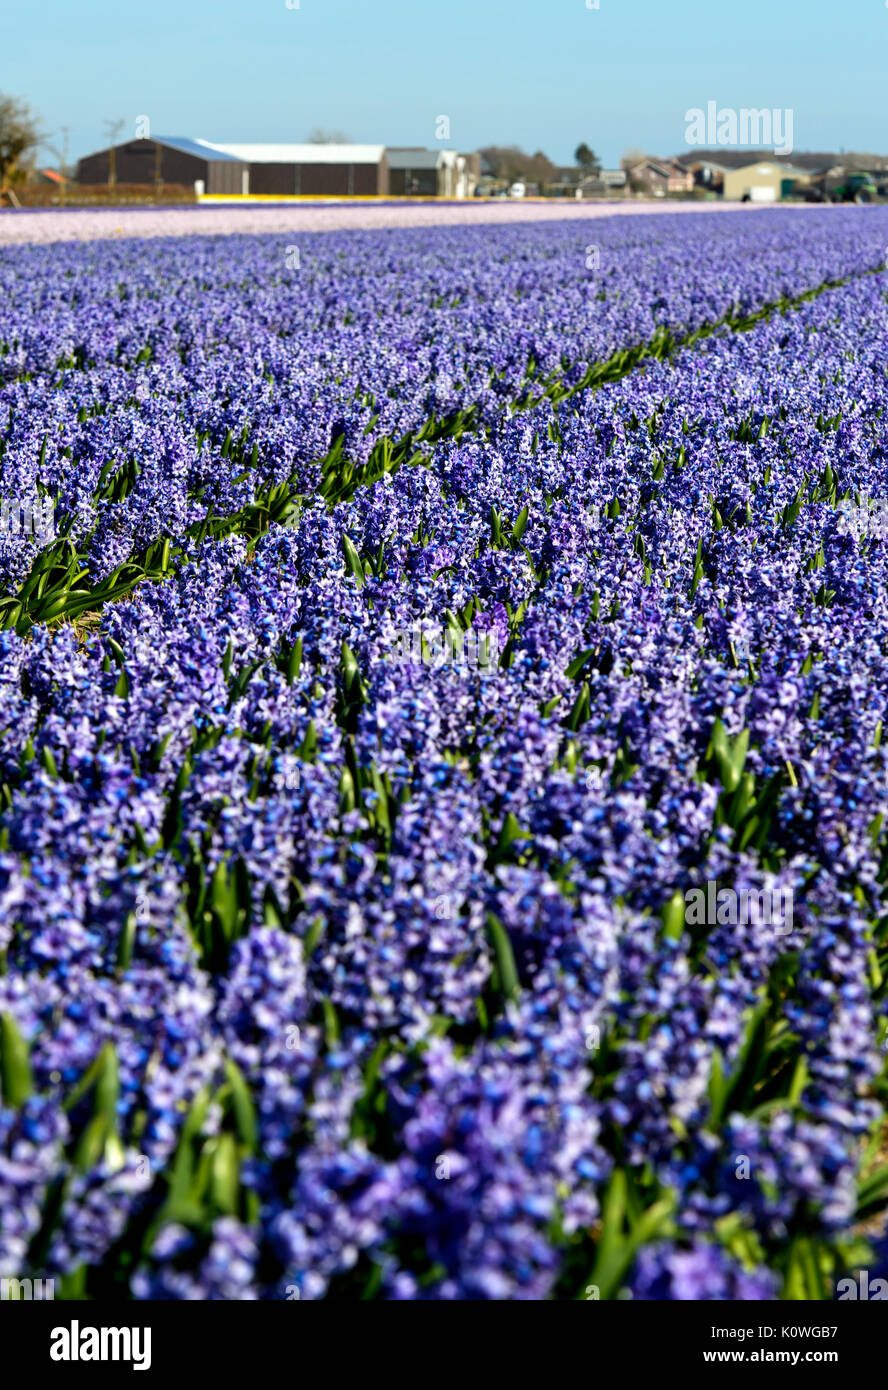 Cultivation area of blooming blue hyacinths, Bollenstreek region, South-Holland, Netherlands Stock Photo